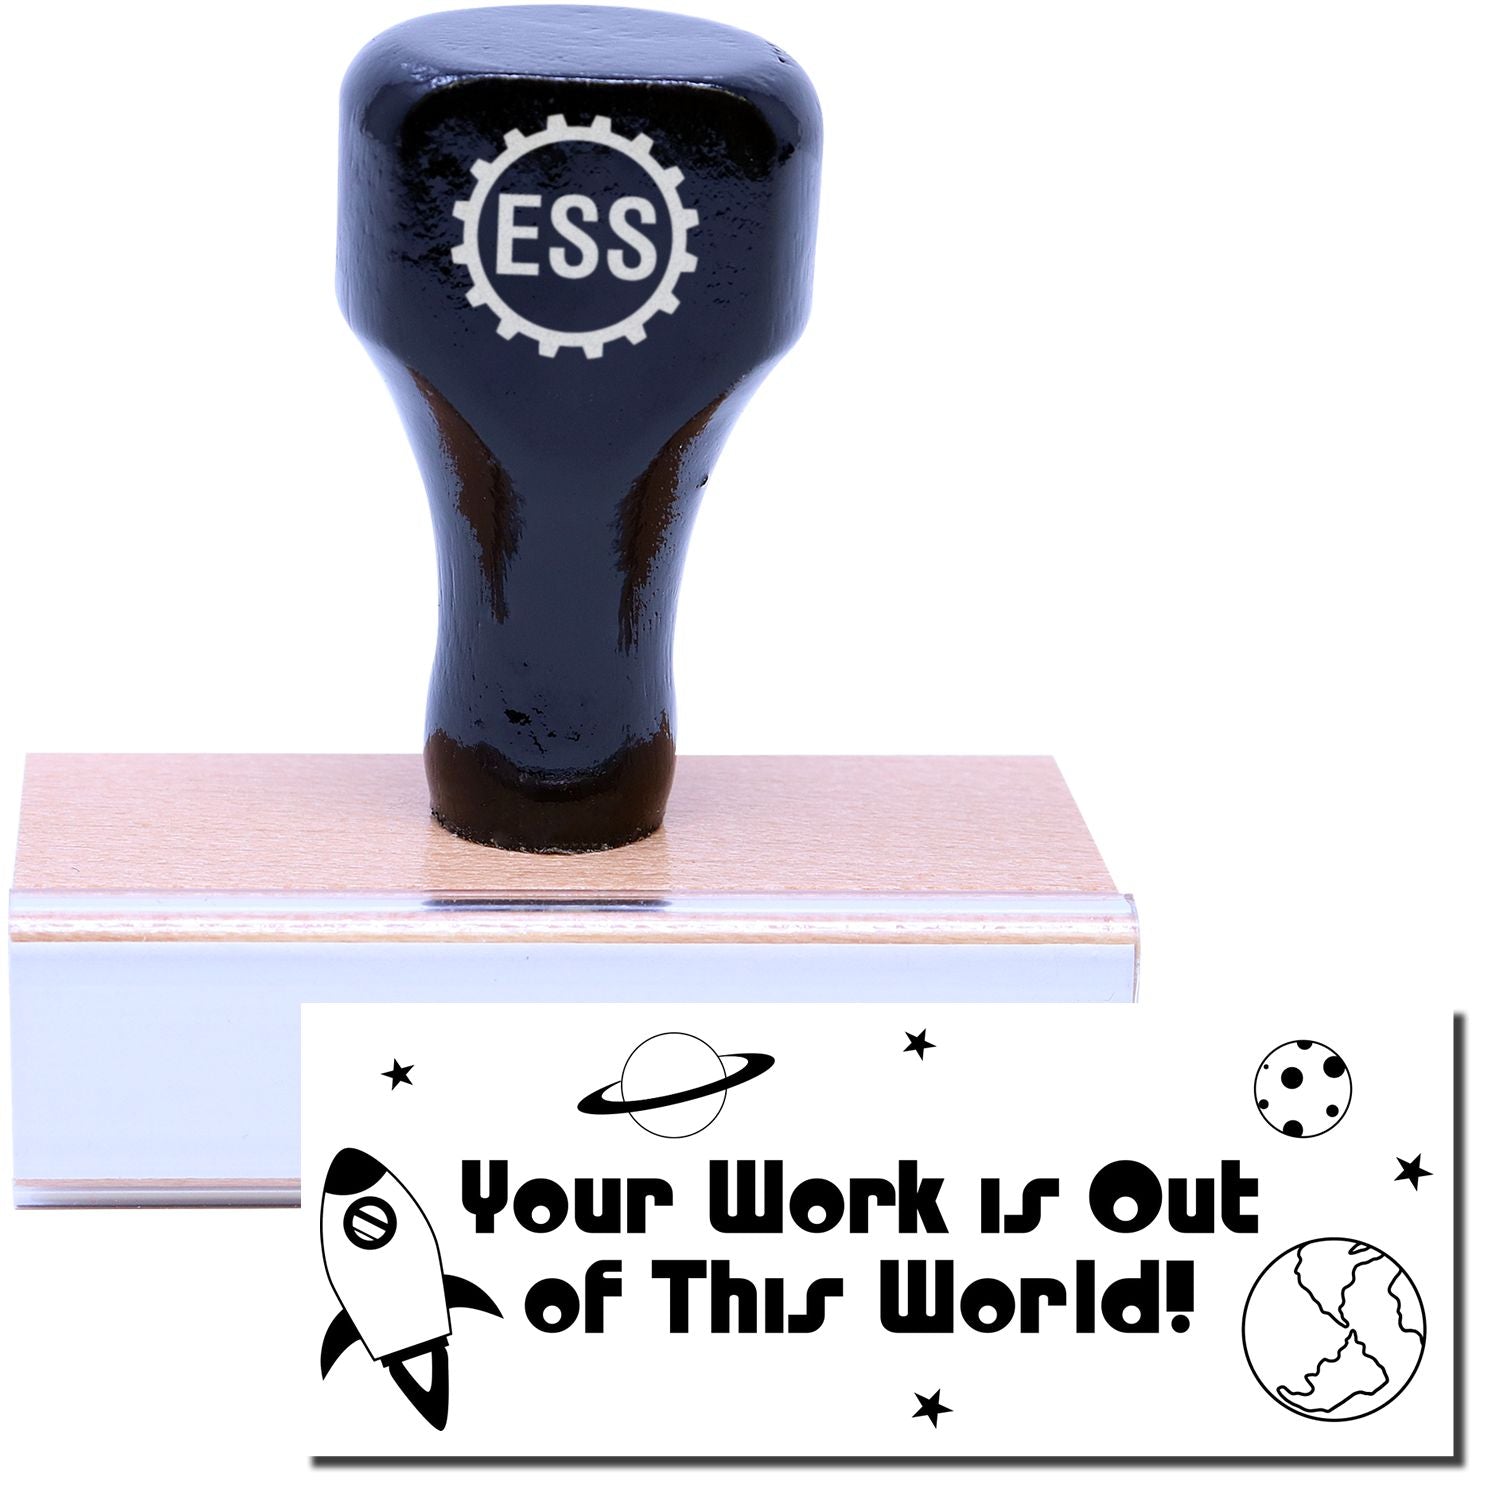 A stock office rubber stamp with a stamped image showing how the text "Your Work is Out of This World!" in a large unique wacky font with space icons like planets, moons, and a rocket ship surrounding the text is displayed after stamping.